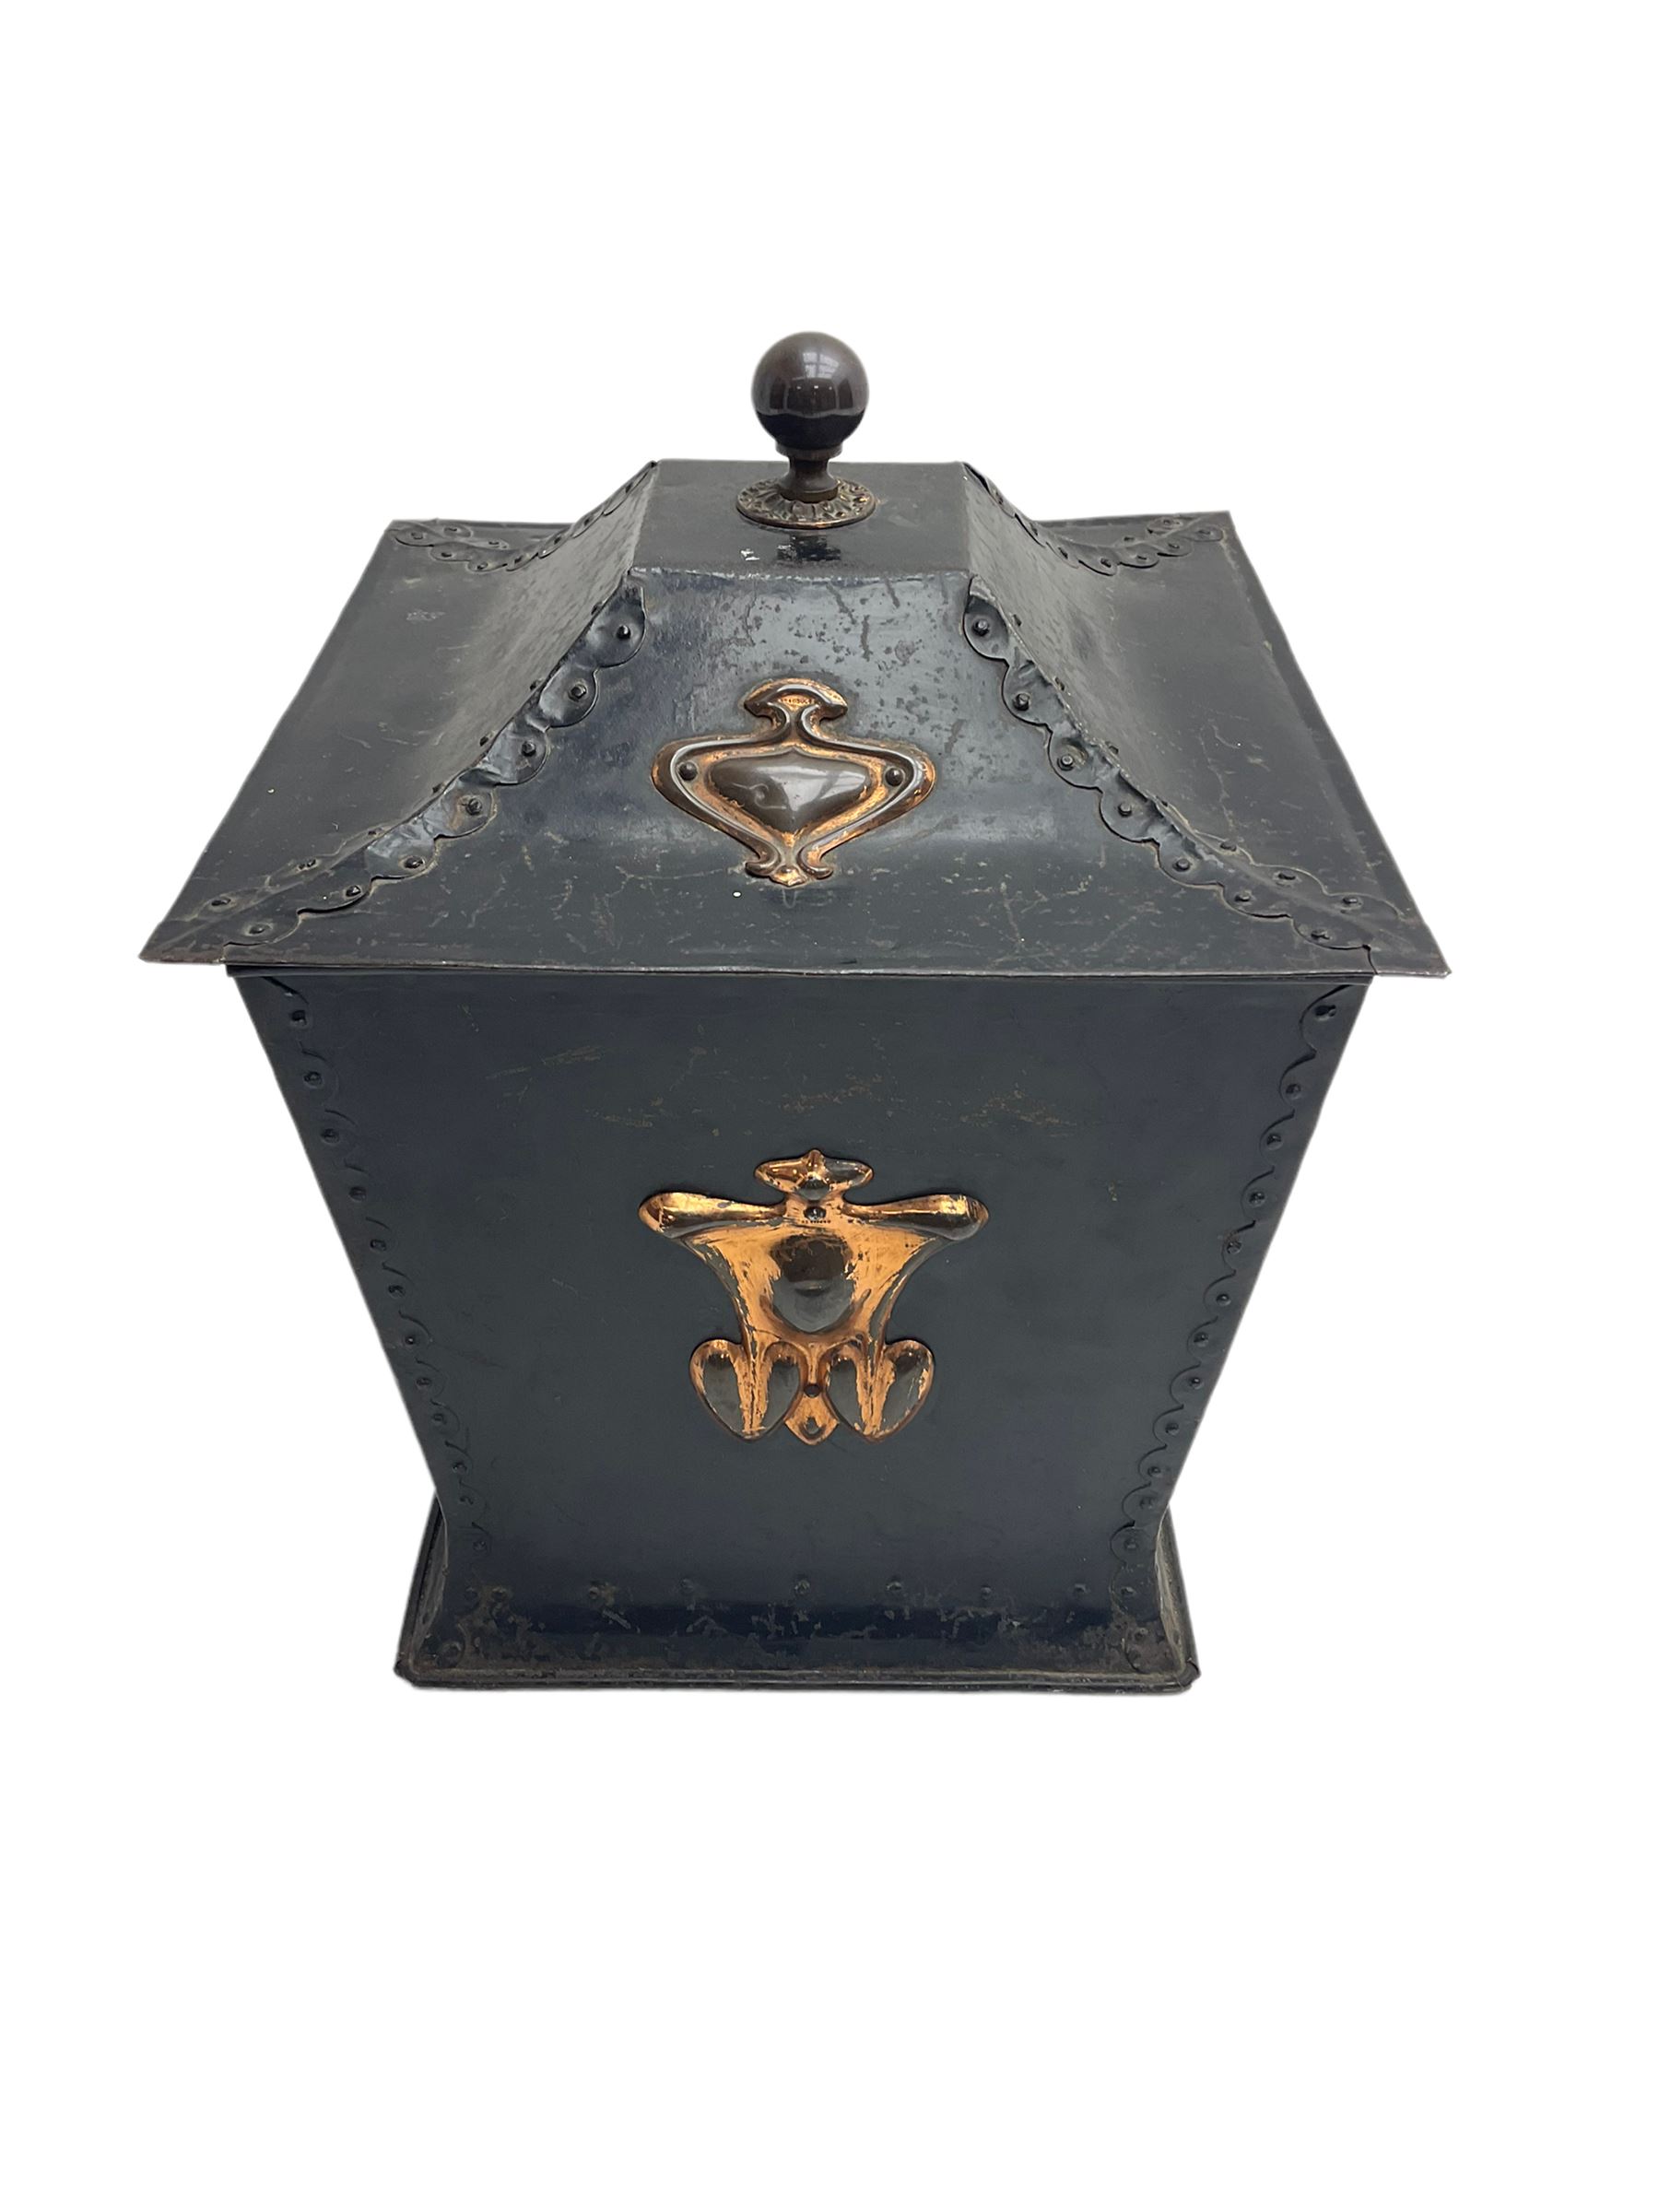 Art Nouveau period metal coal bucket with hinged lid - Image 2 of 9